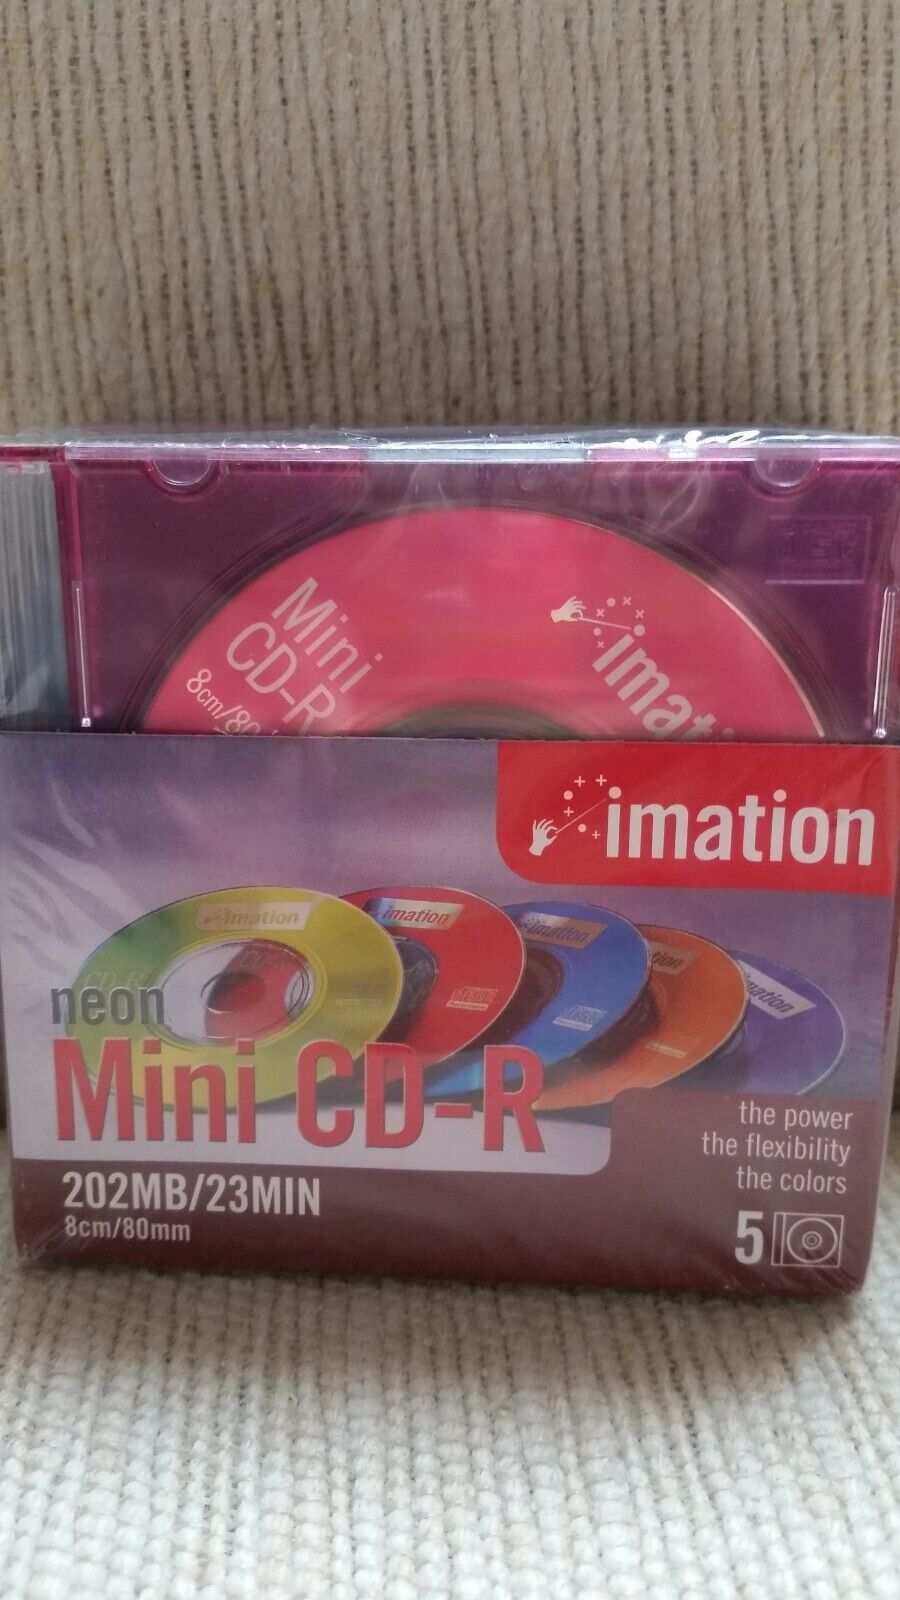 imation neon Mini CD-R 202mb/23min with cases (5 pack)